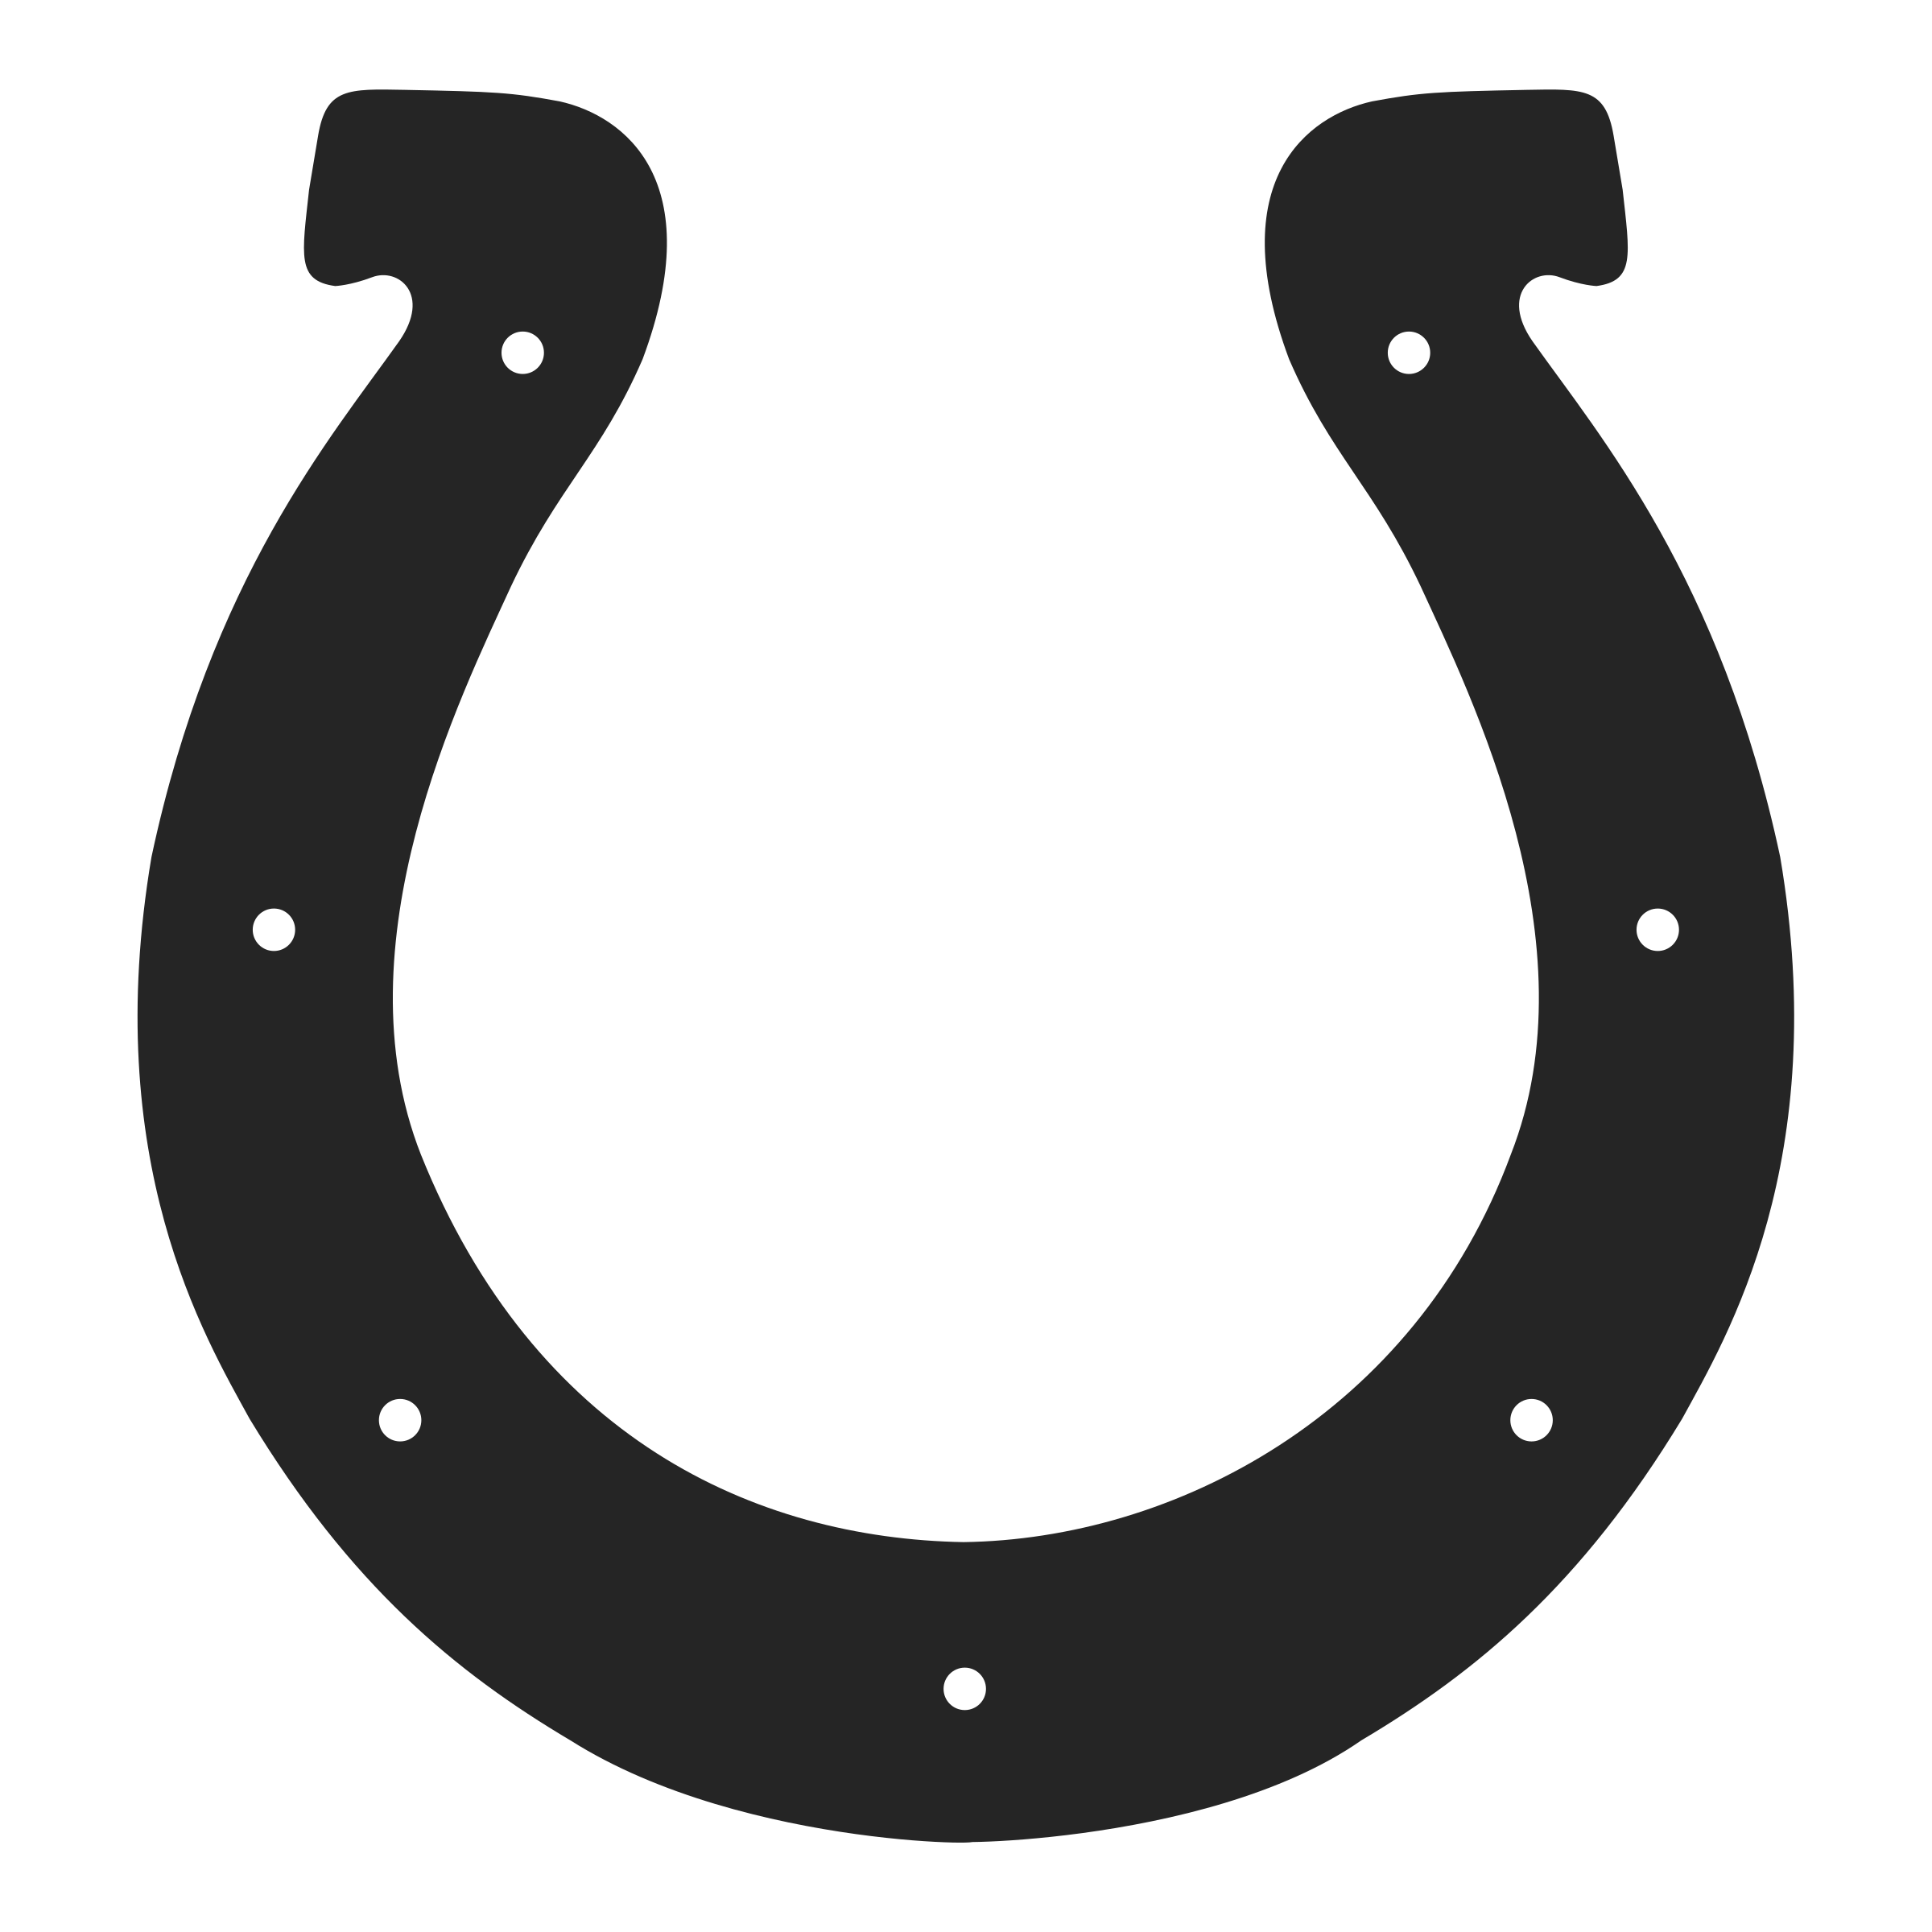 Indianapolis Colts PNG-PlusPN